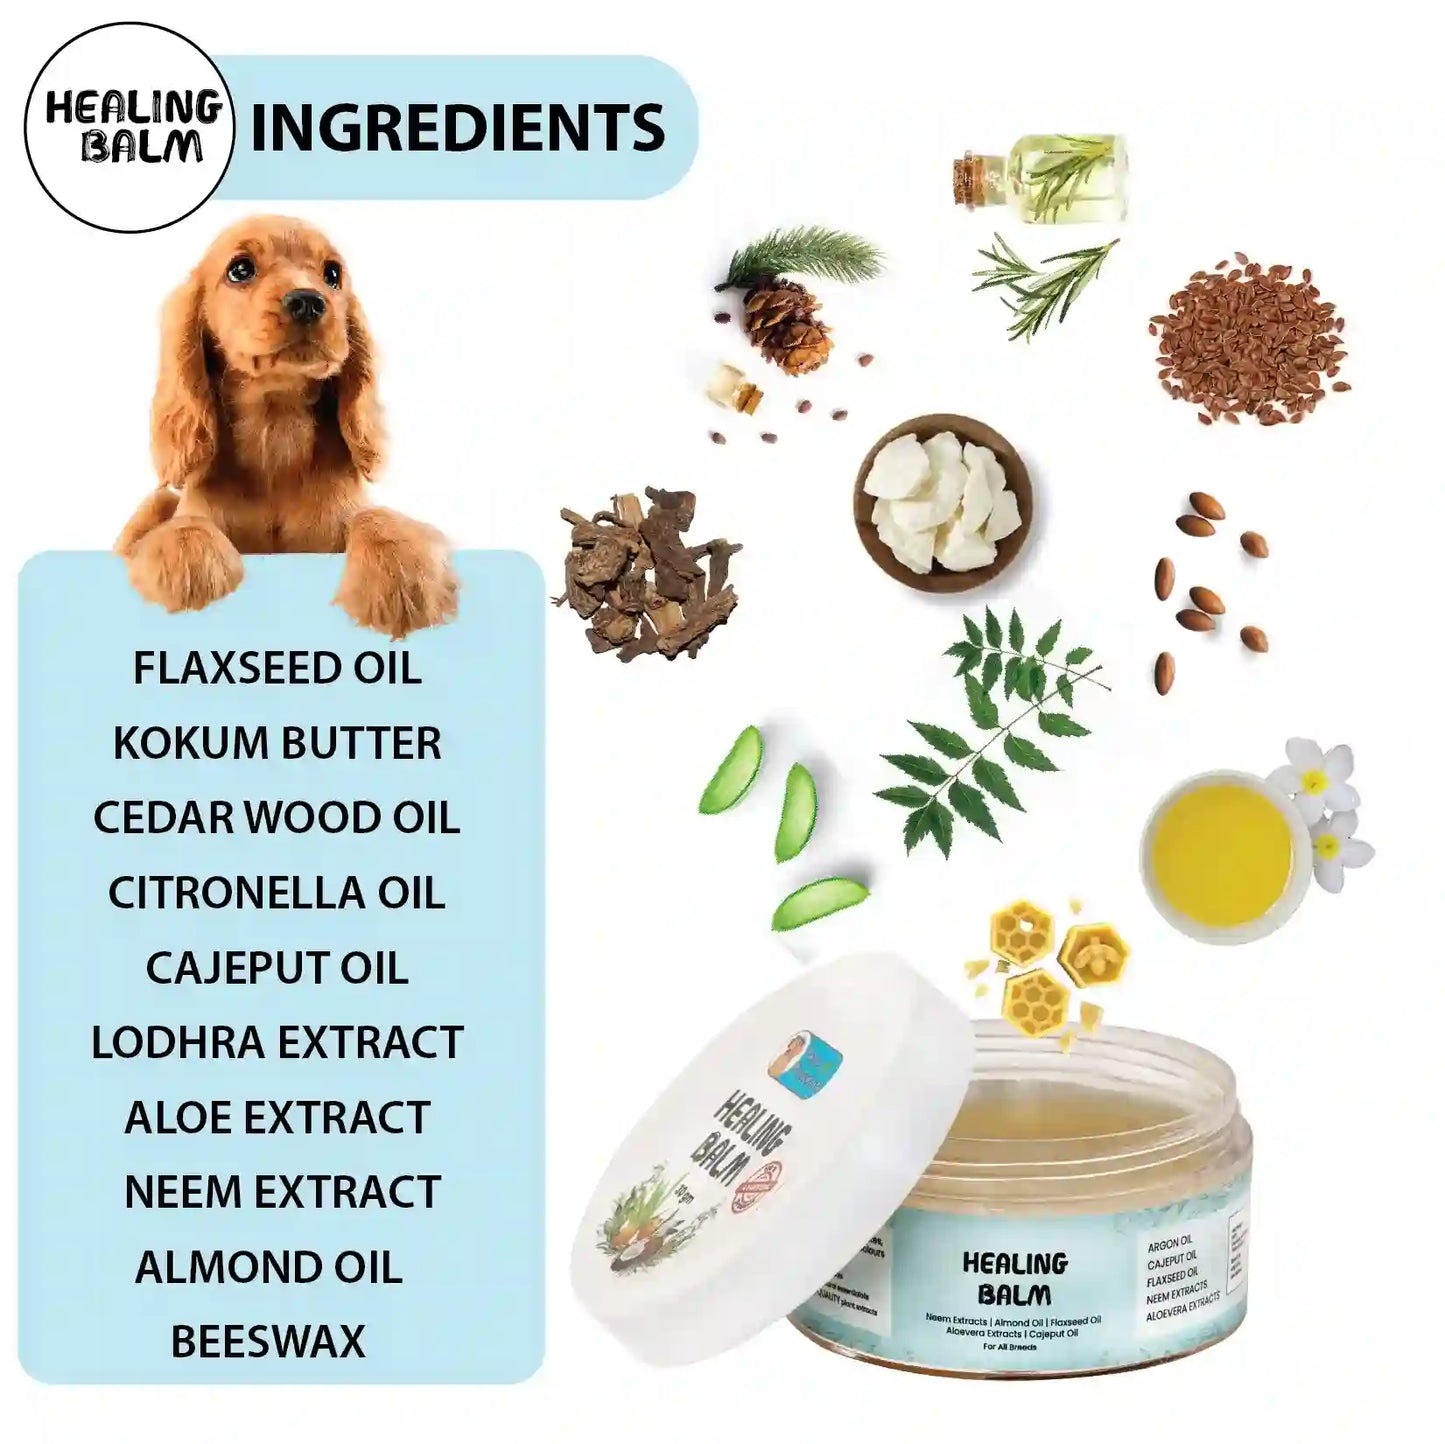 Happy Pet with Healthy Skin After Using Papa Pawsome’s Healing Balm - Relief from Irritation and Dryness